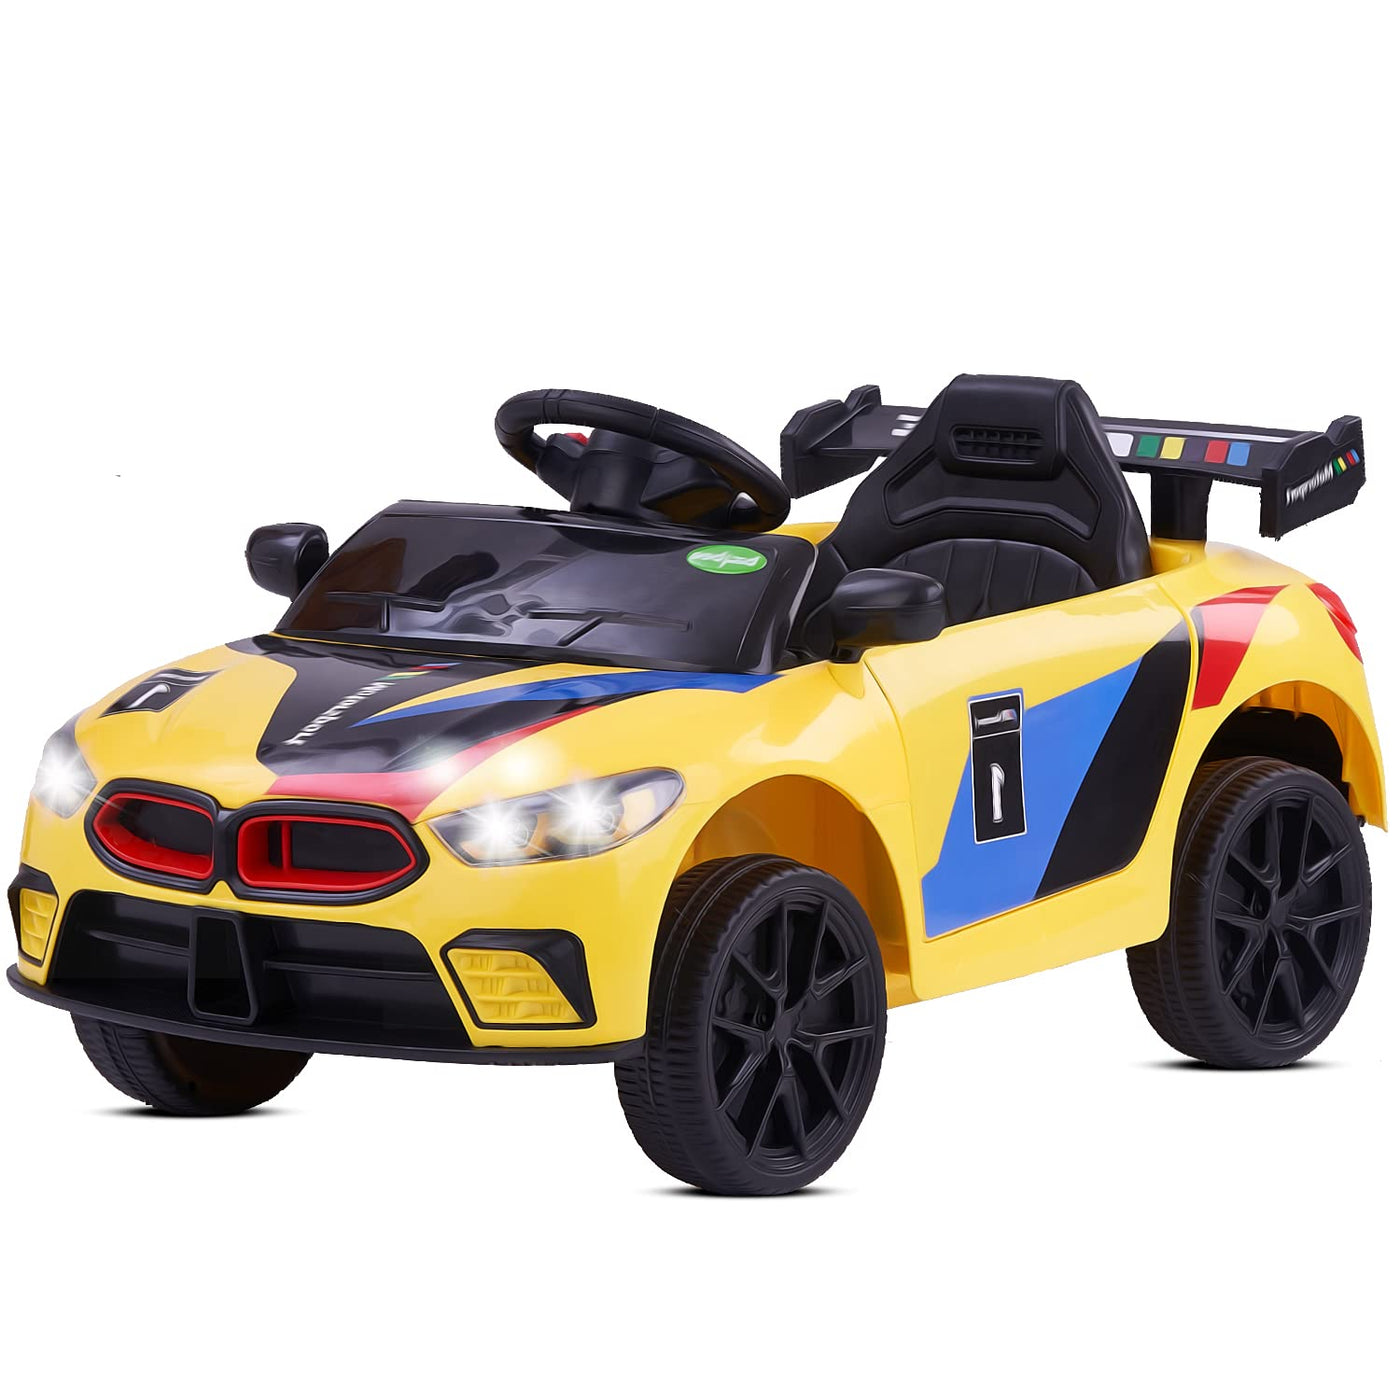 Baybee Drift Battery Operated Ride on Kids Car